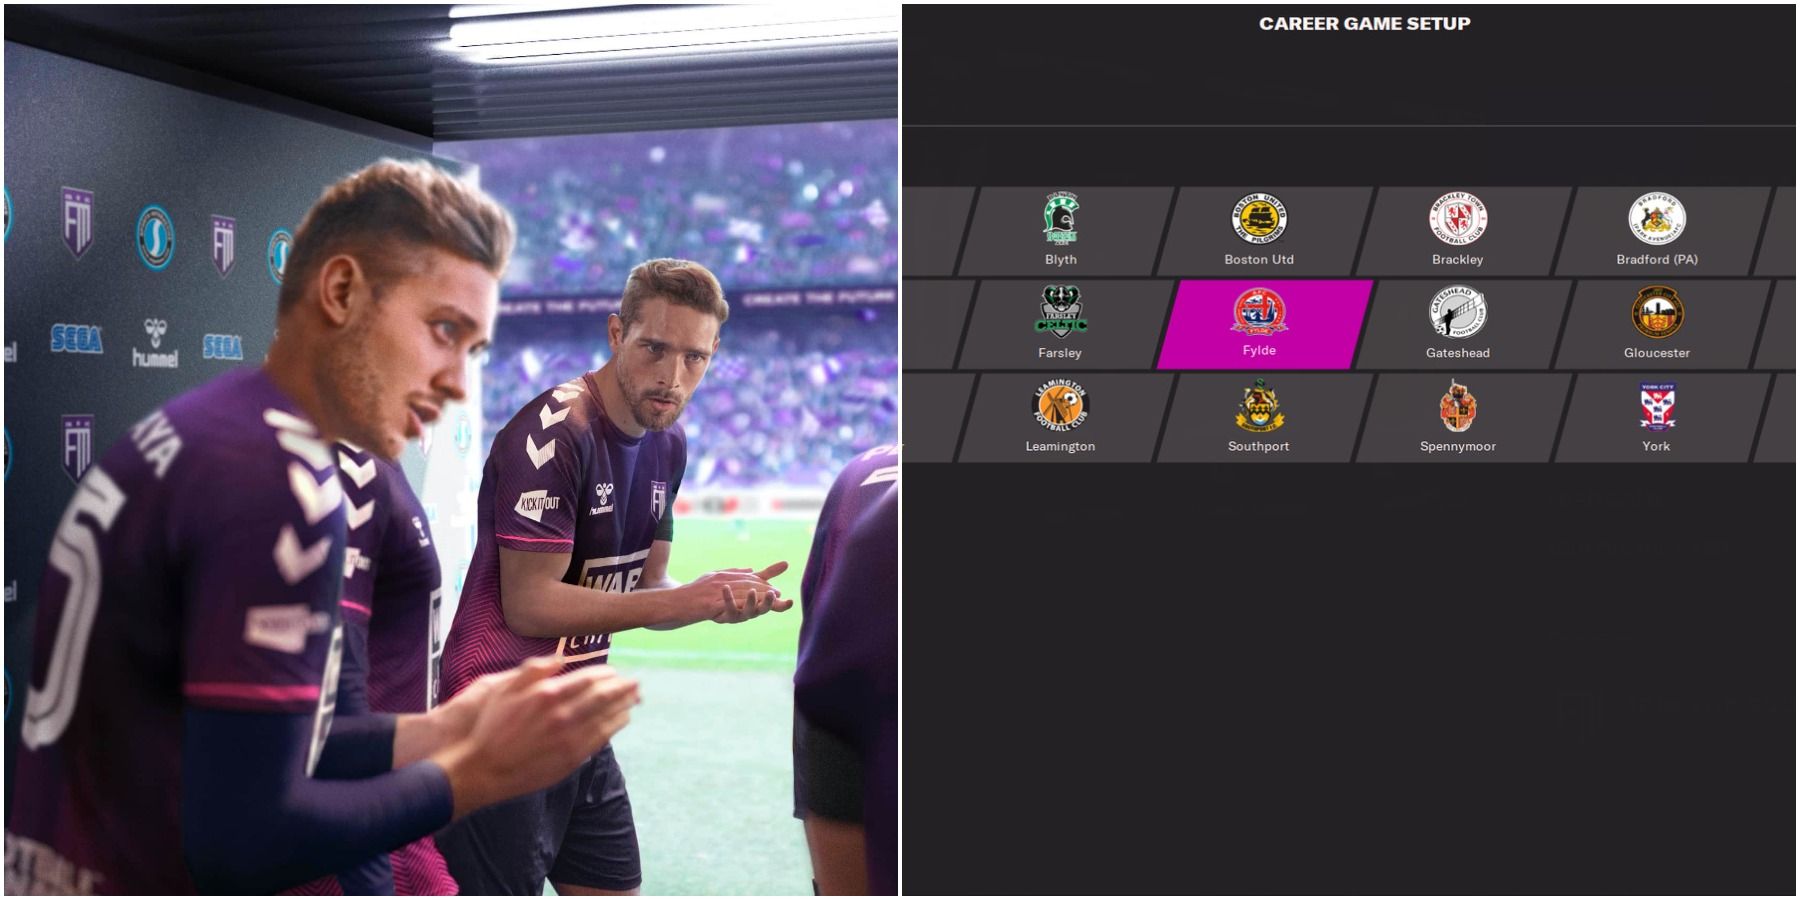 (Left) Promotional image of players clapping (Right) Team selection screen